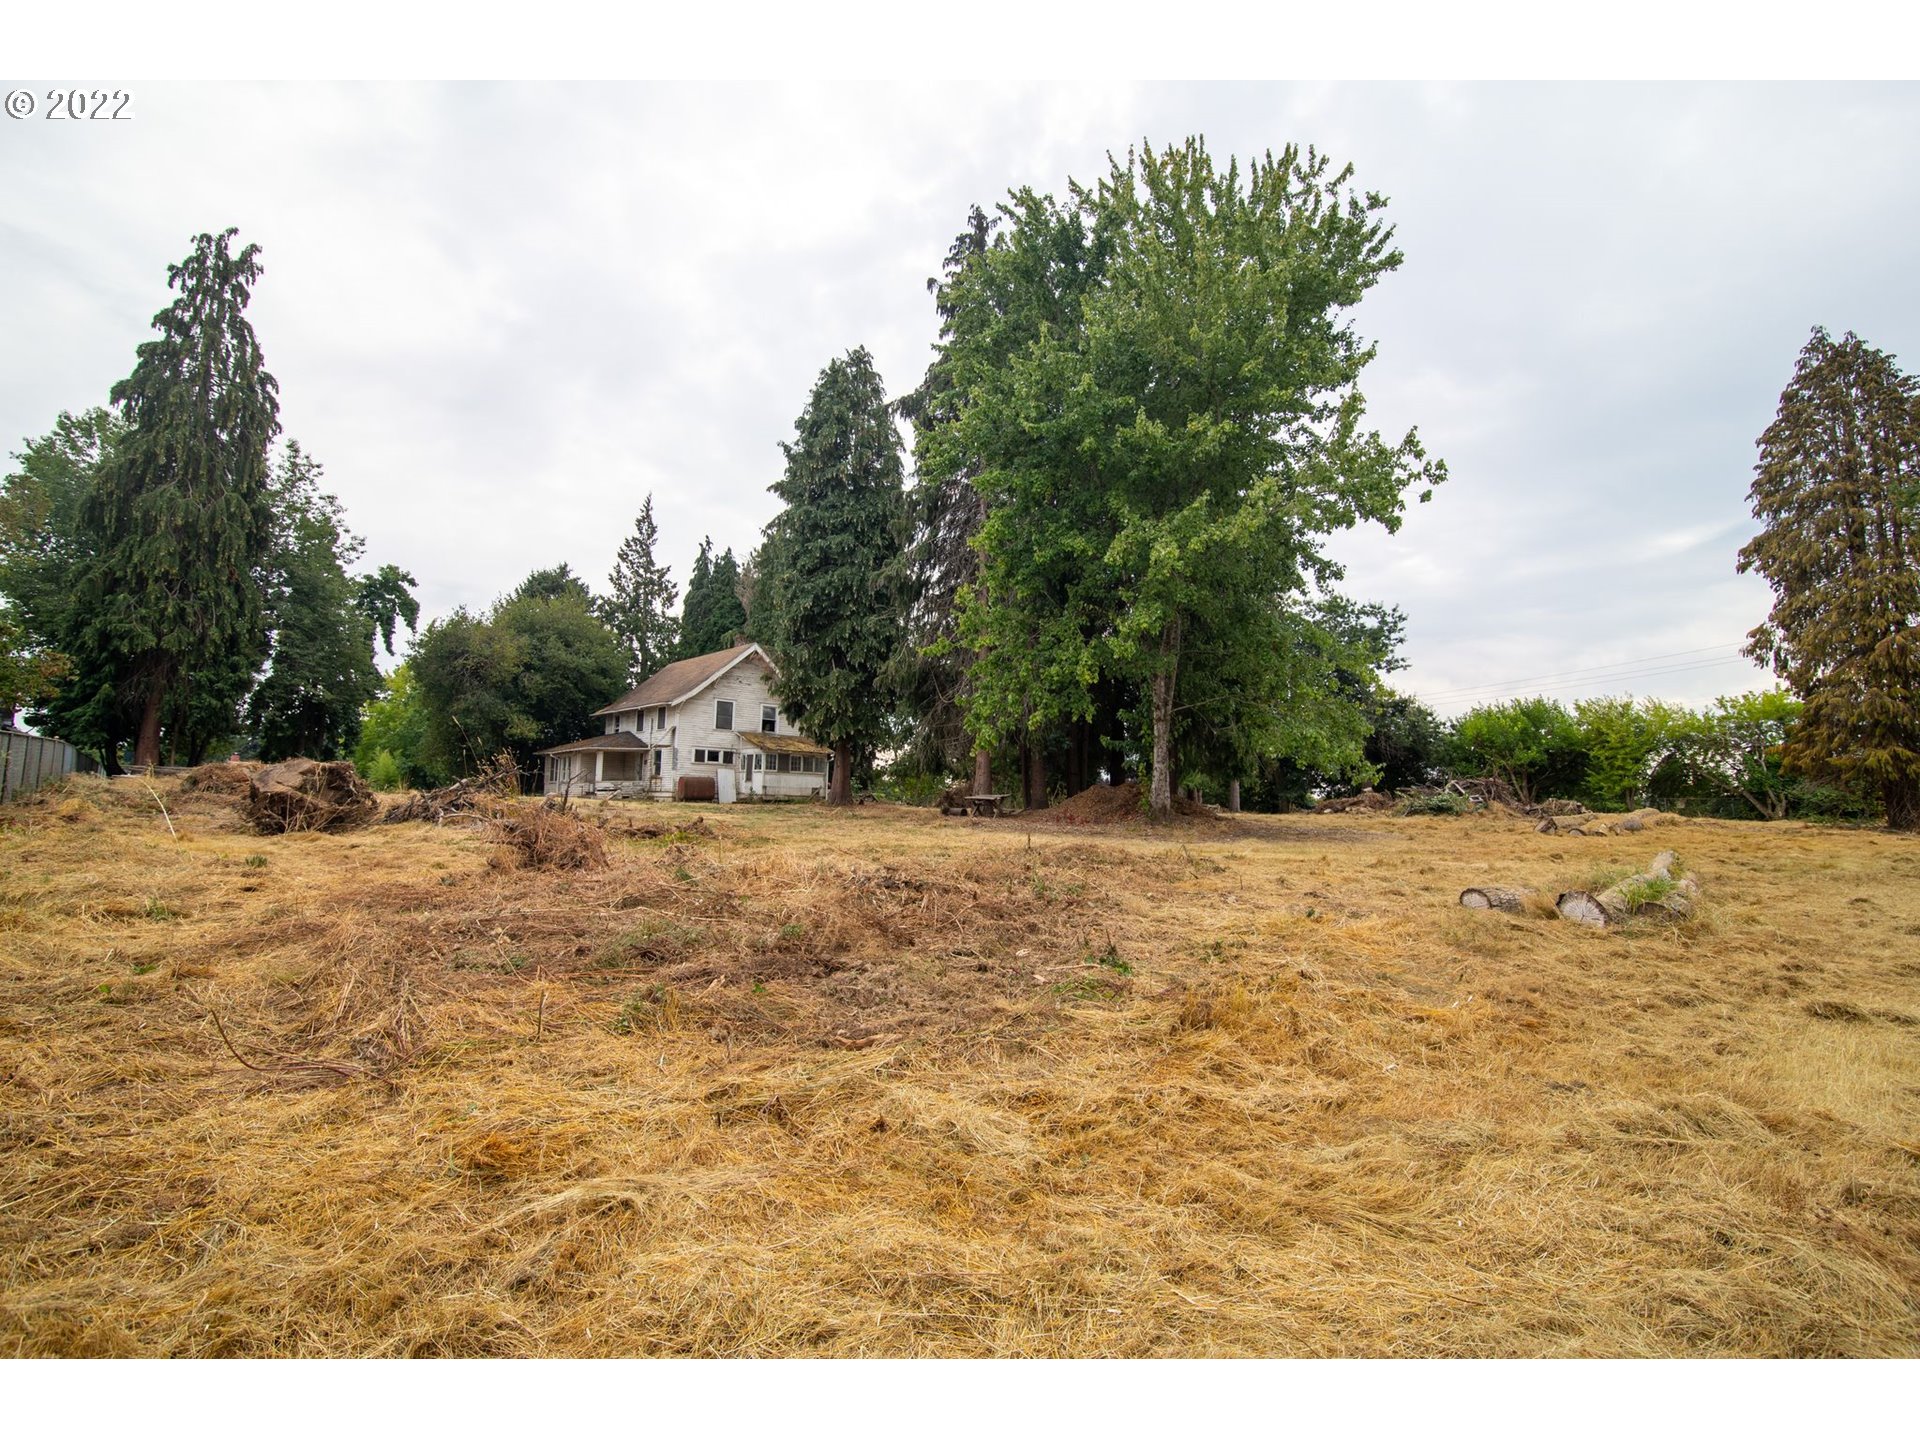 2004 NW 94TH ST, Vancouver, WA 98665